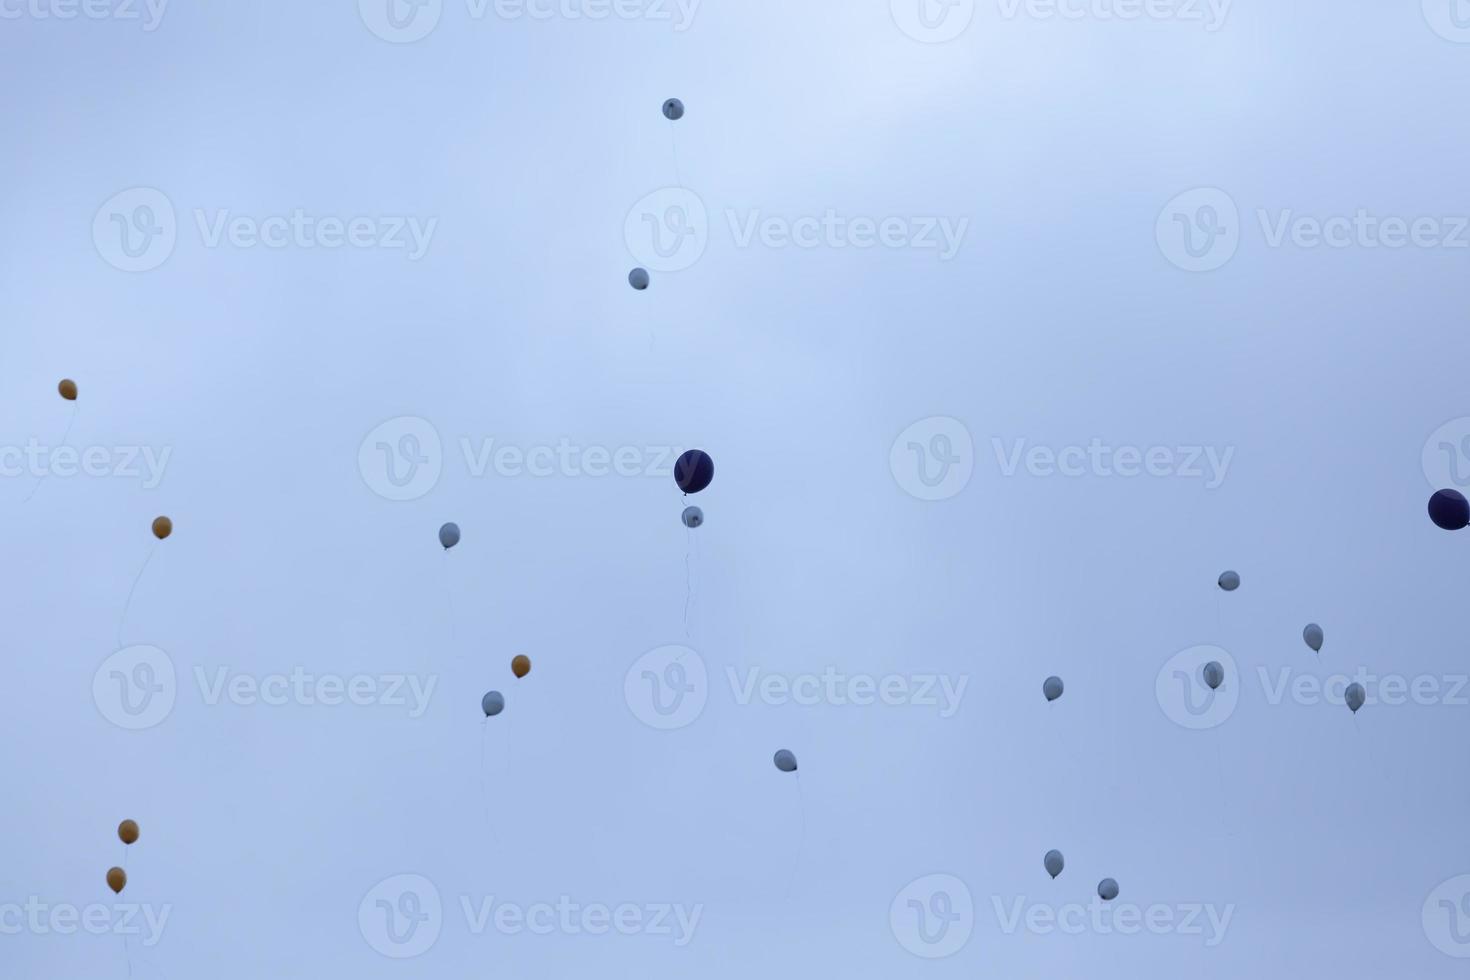 balloons with helium in sky photo